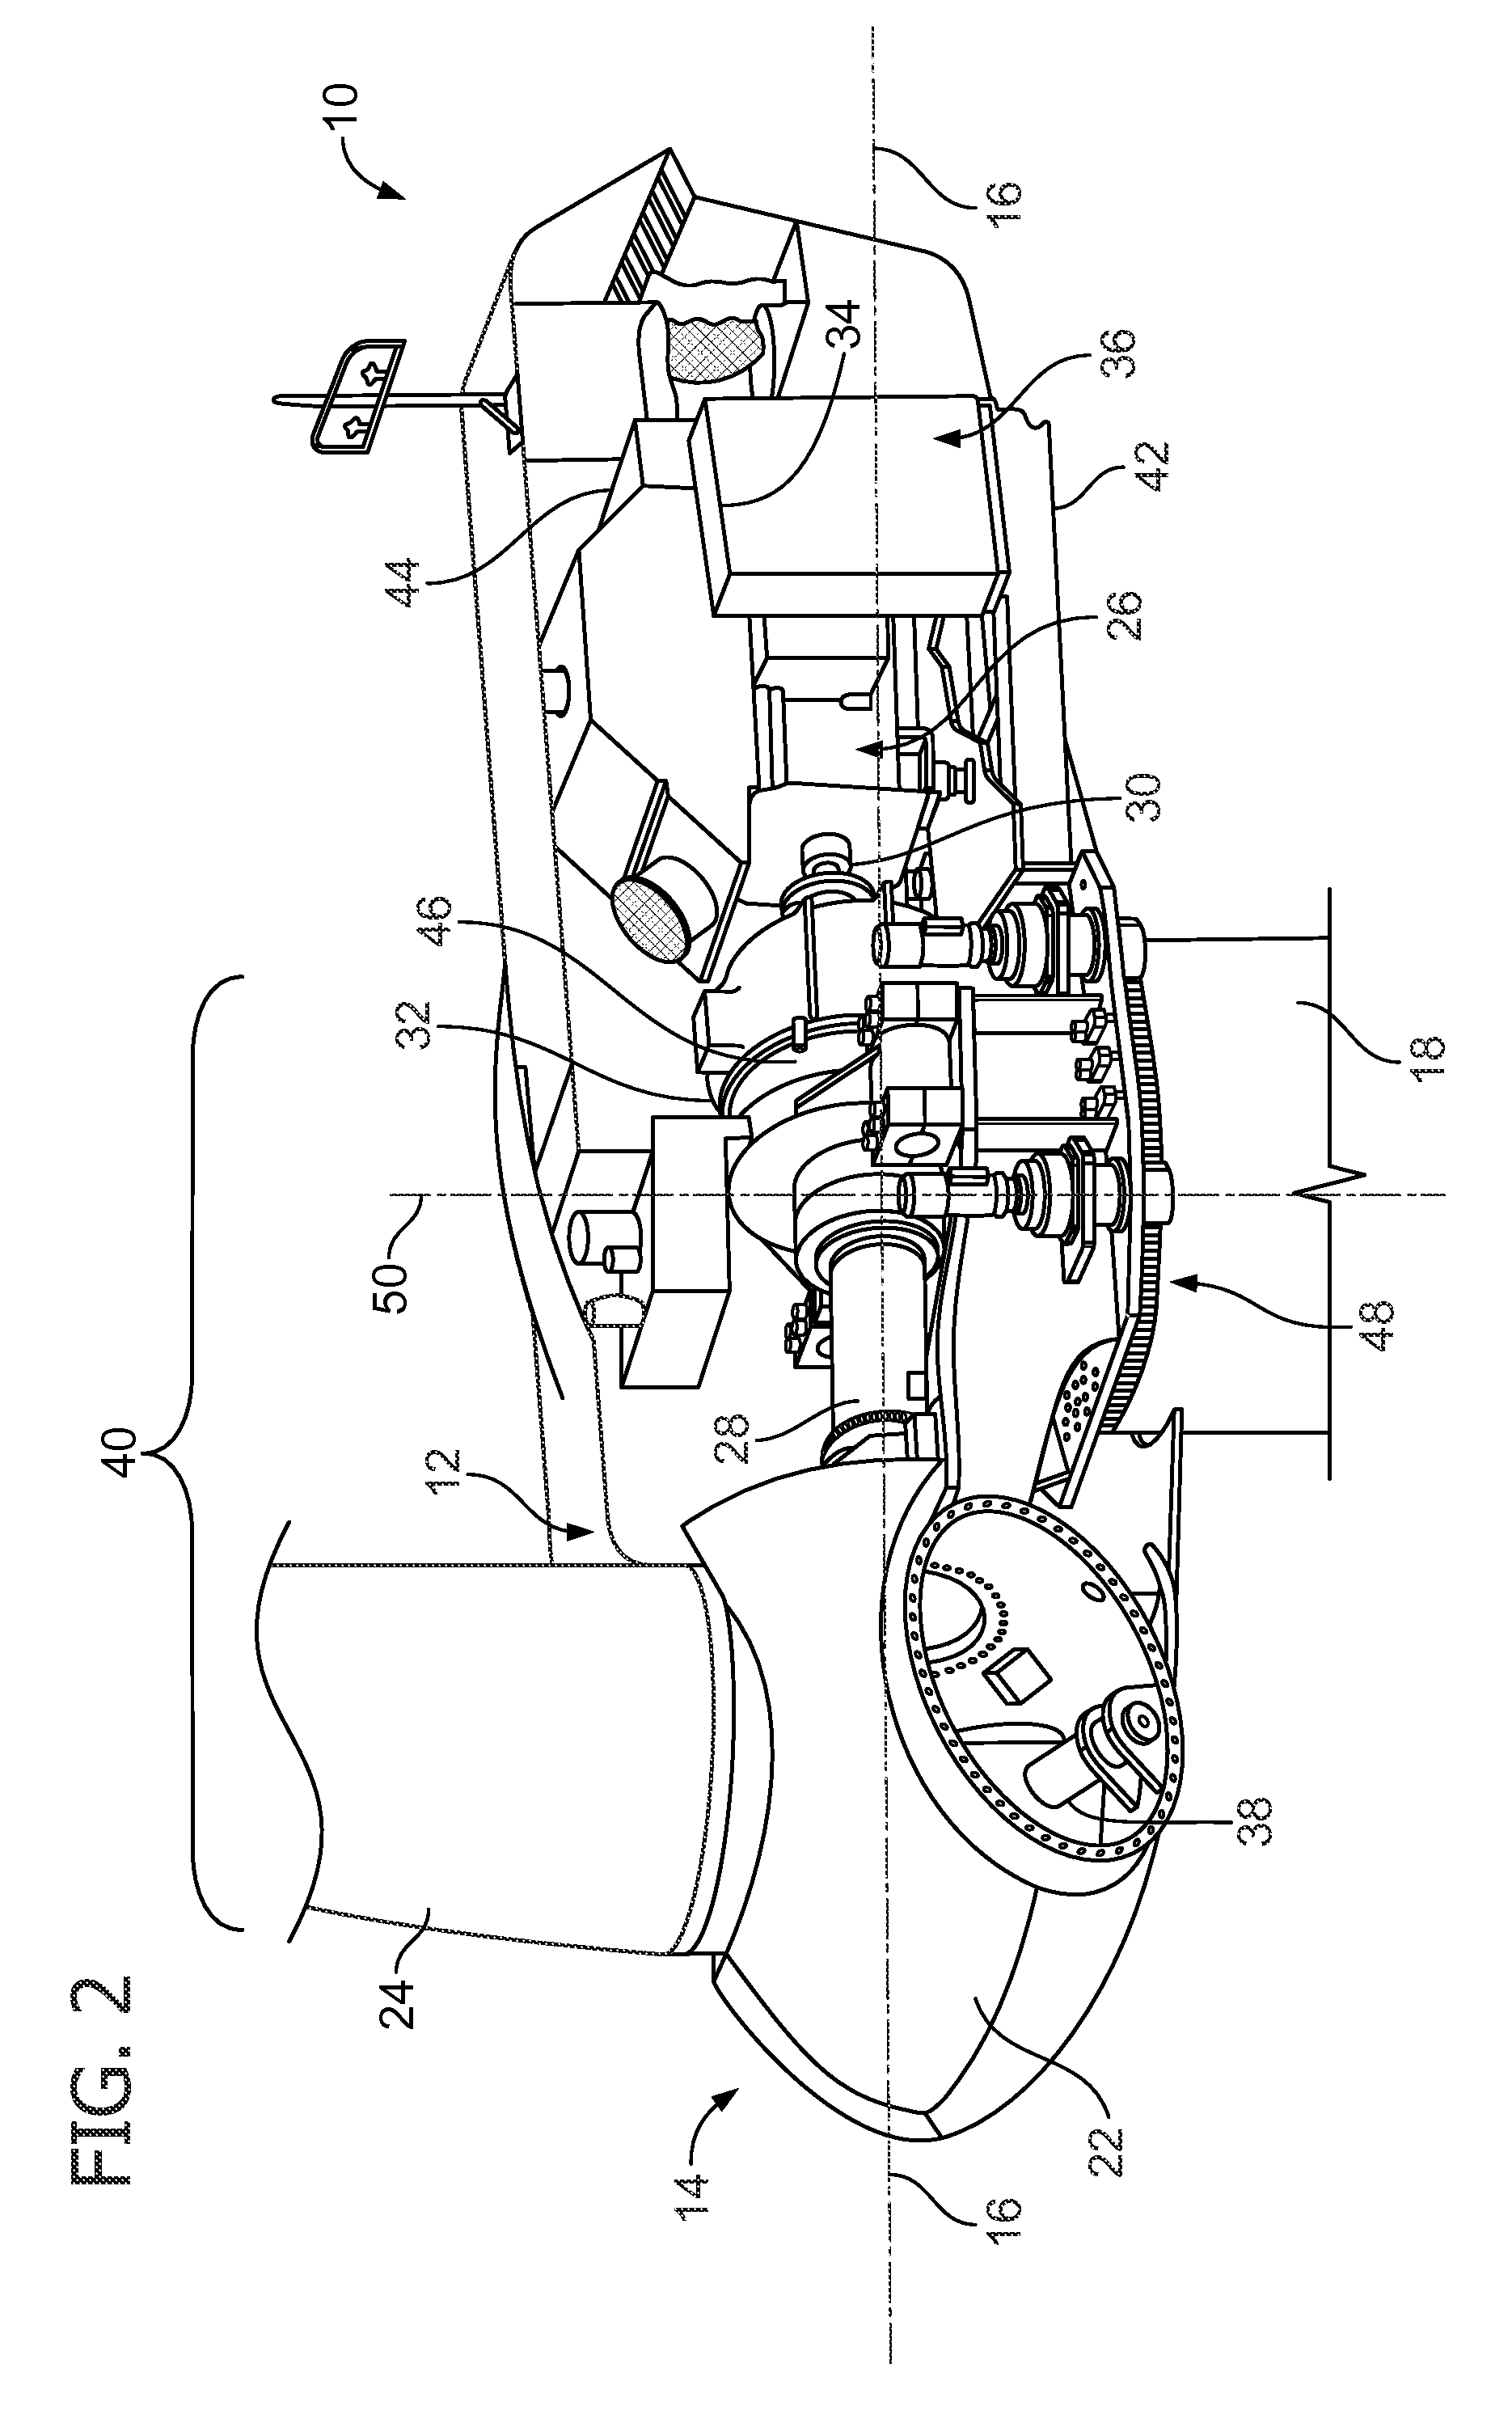 Method and system for extracting inertial energy from a wind turbine